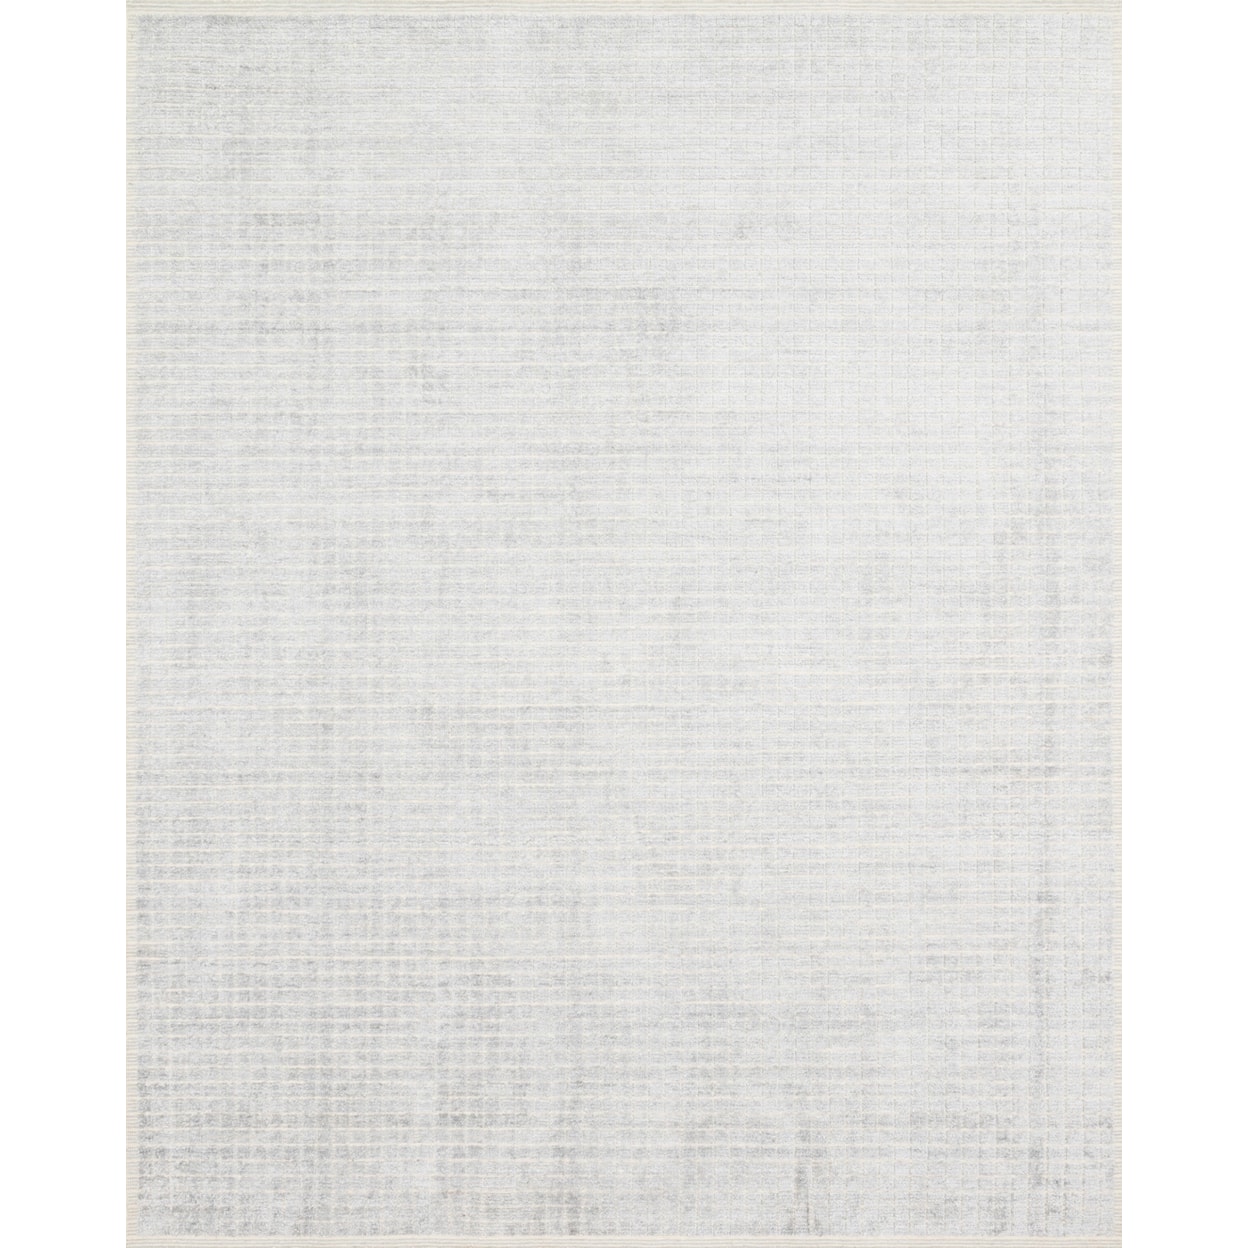 Reeds Rugs Beverly 4'0" x 6'0" Silver / Sky Rug